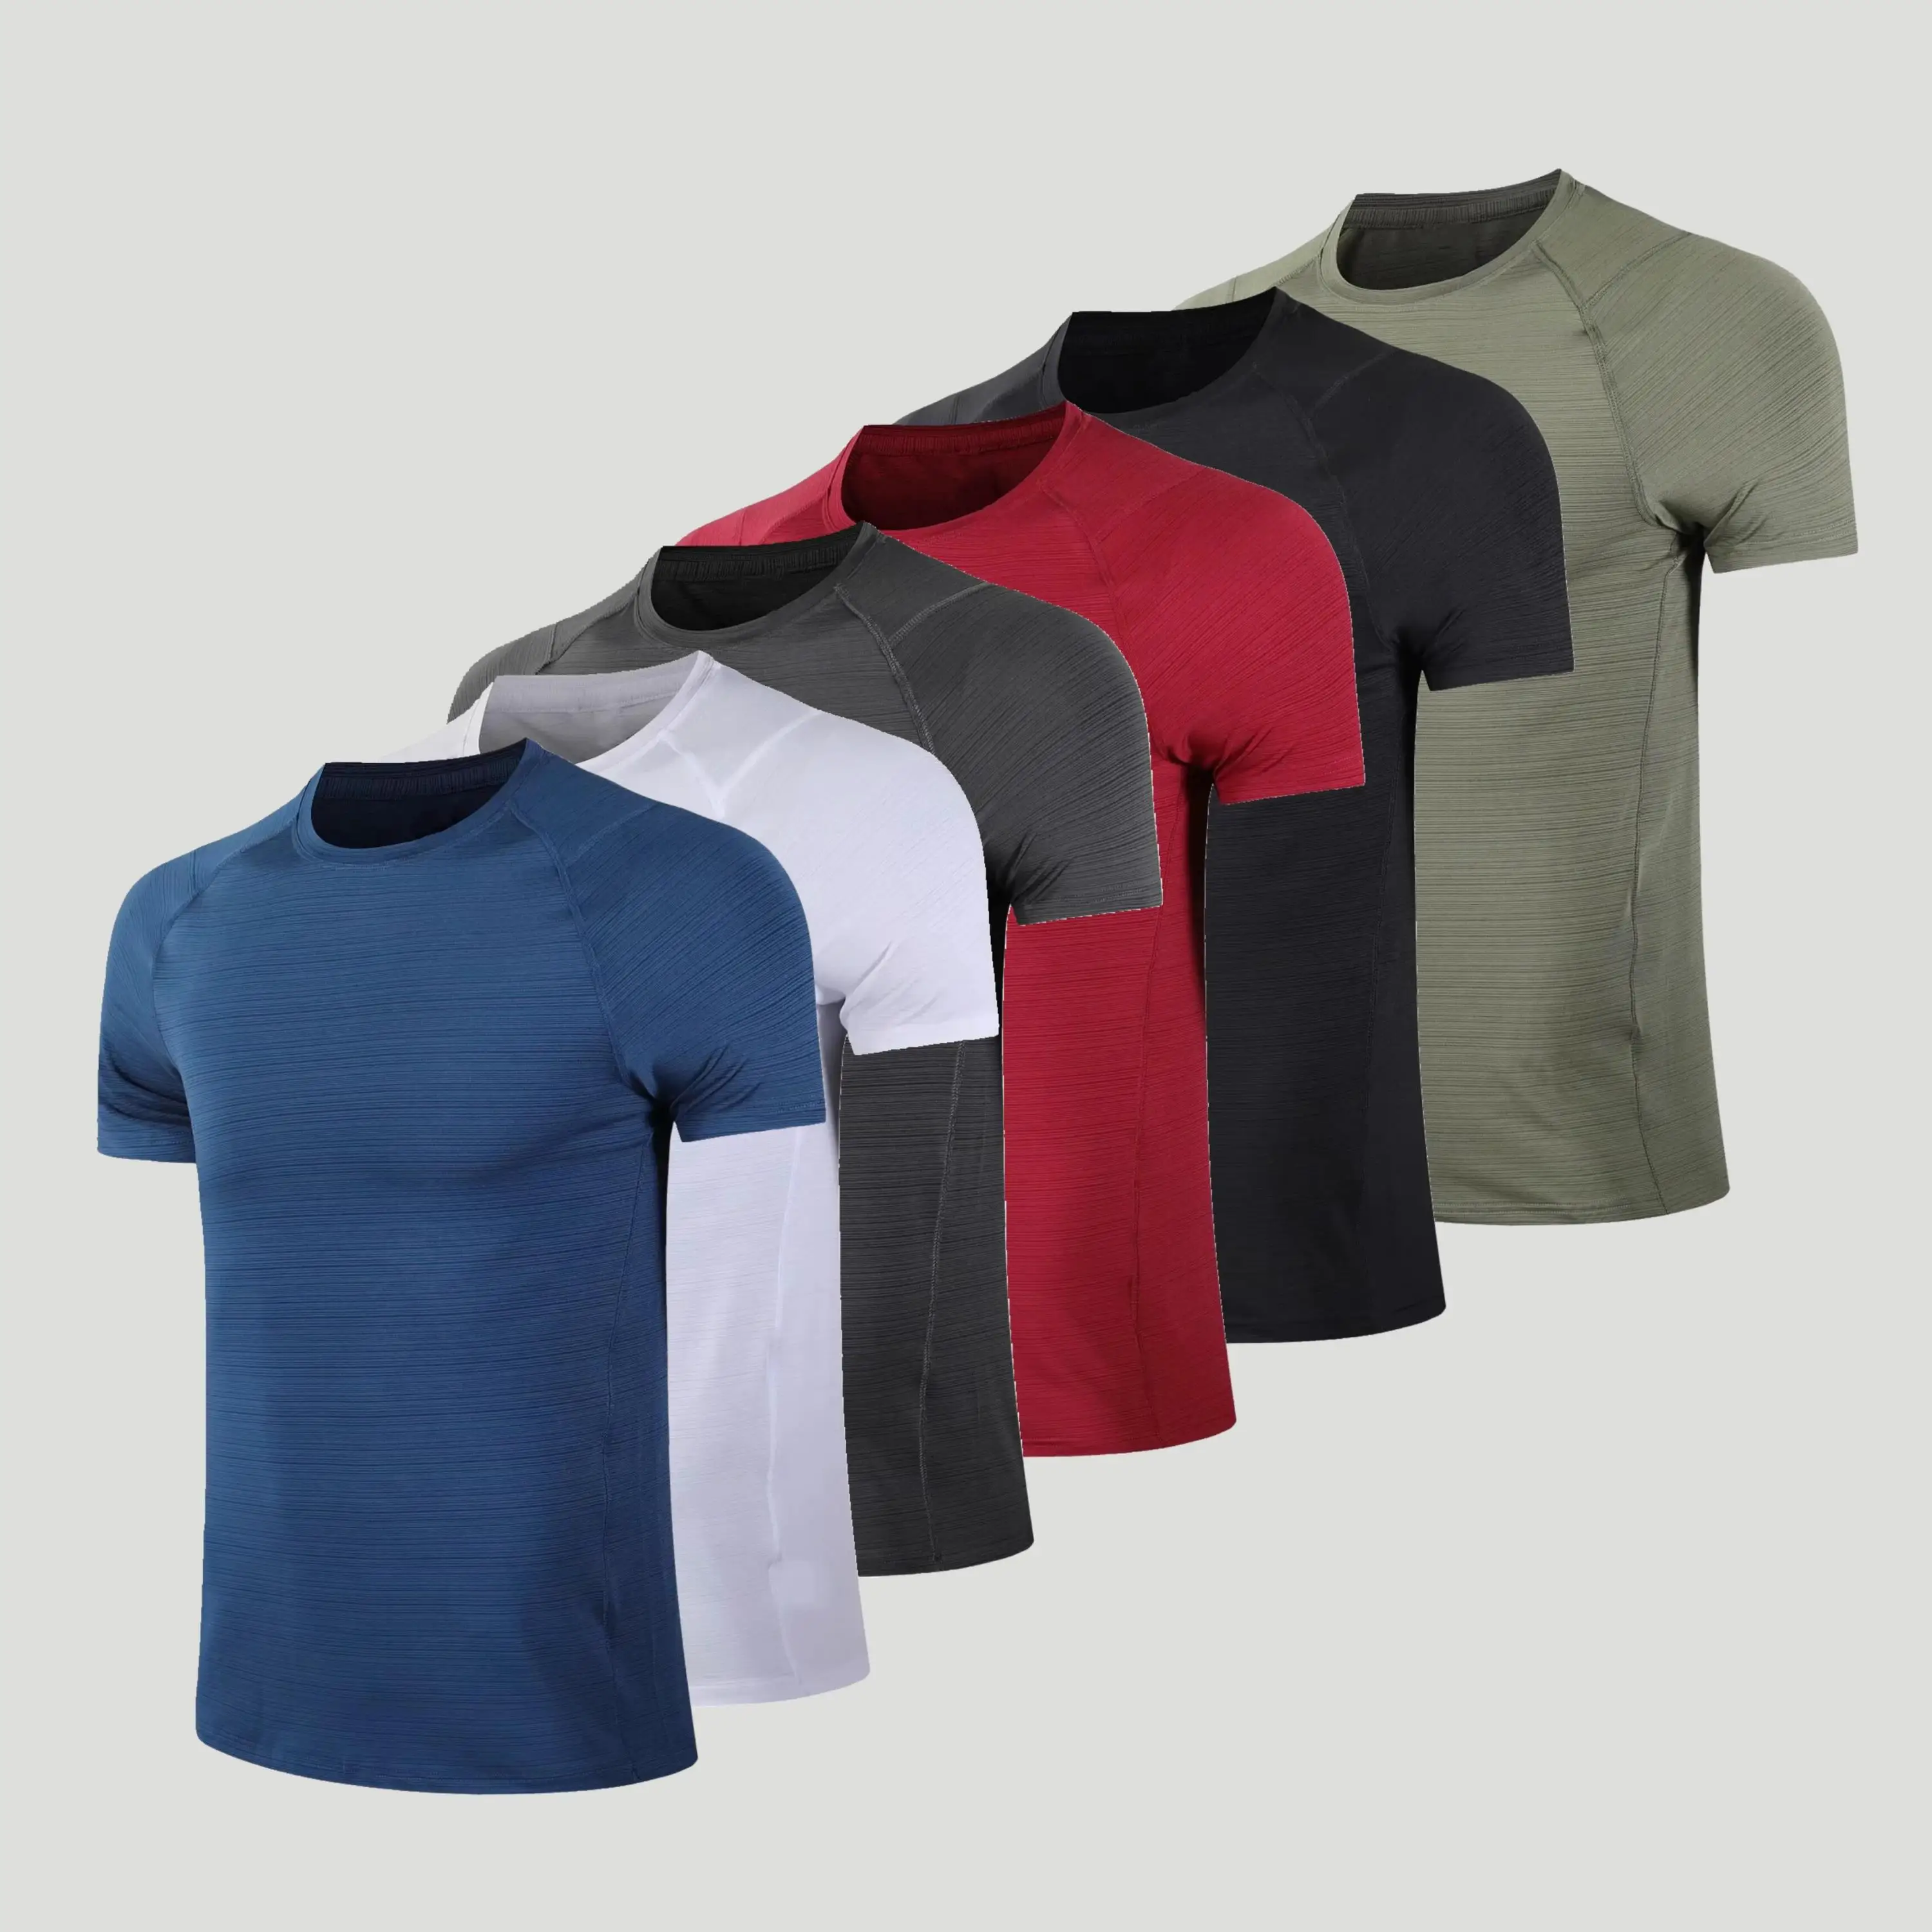 

mens gym t shirt 90% Polyester 10% Elastane Men's Quick Dry Moisture Wicking Active Athletic Performance Crew gym tshirt